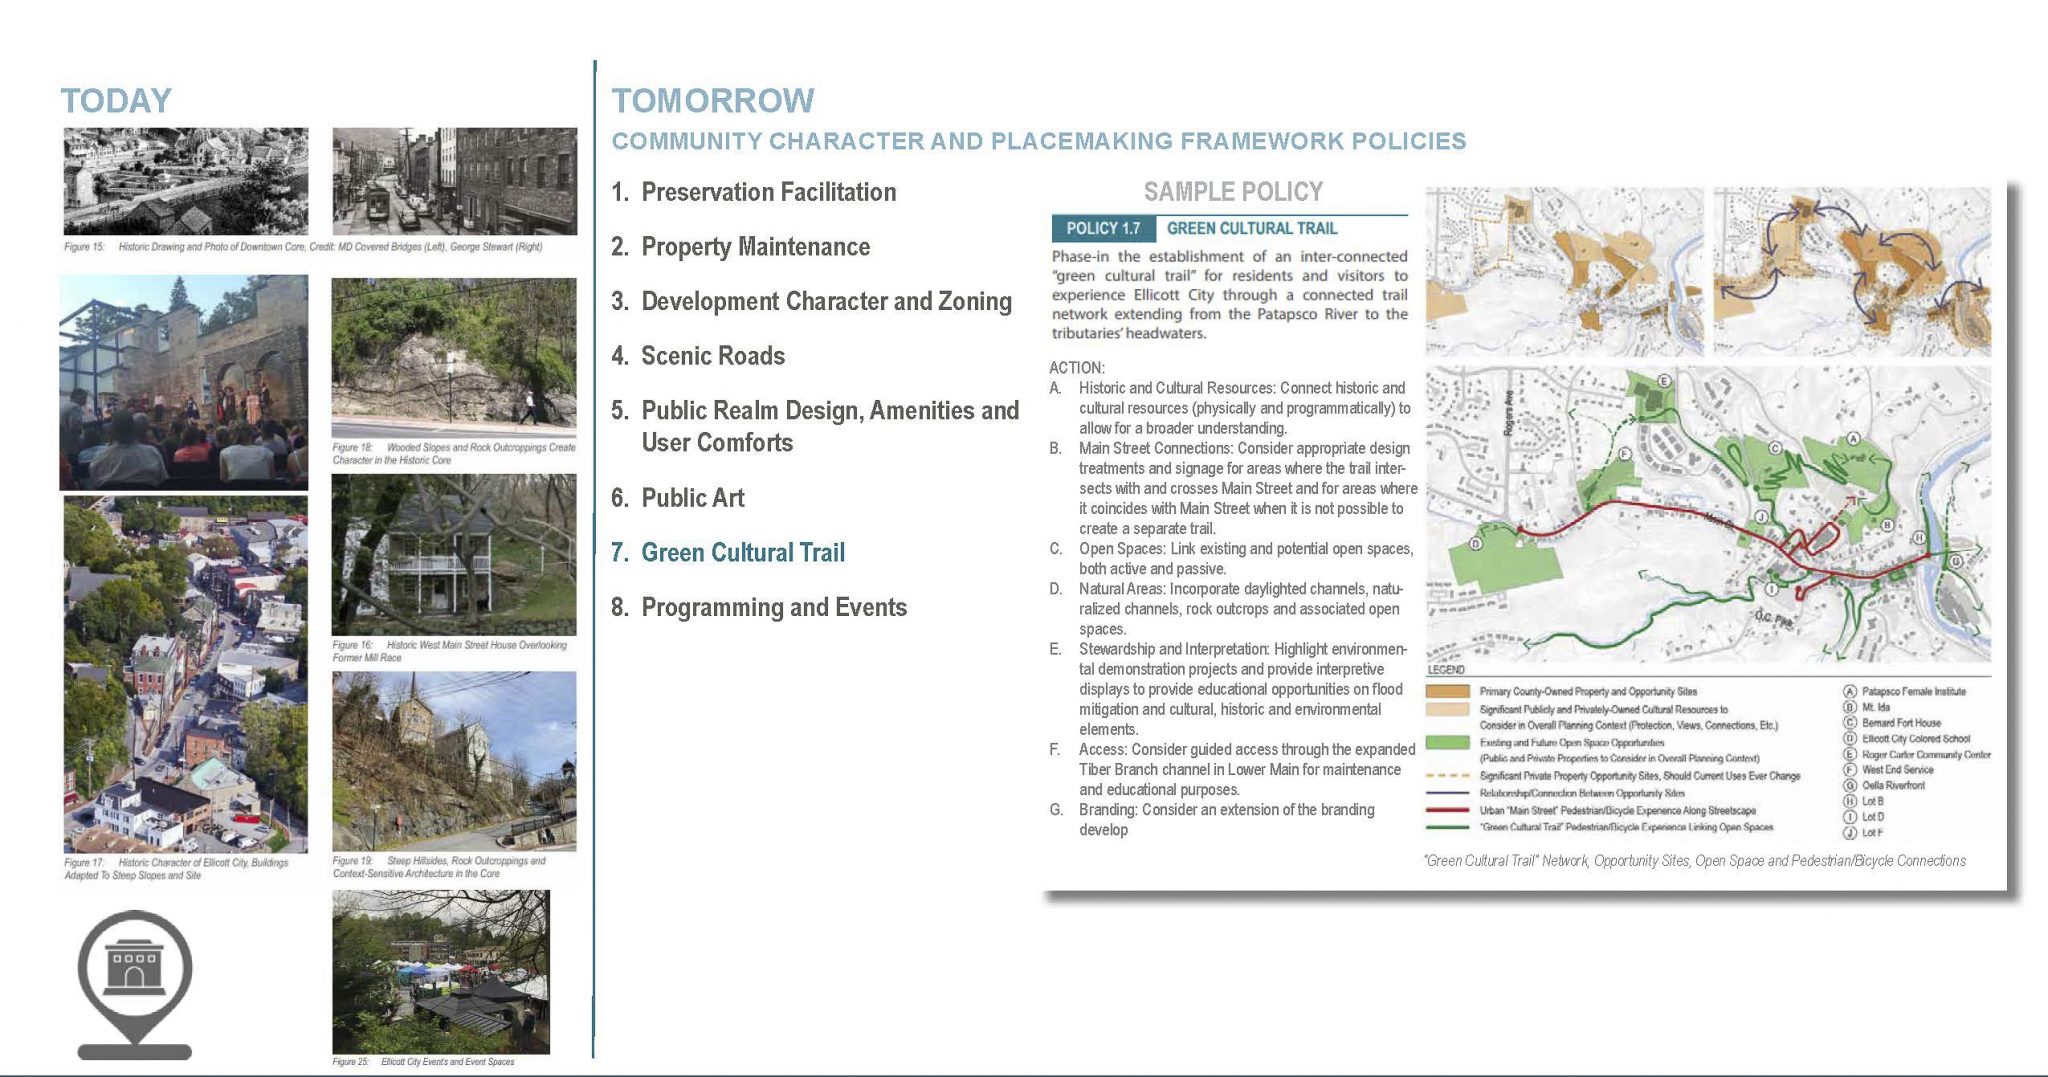 Ellicott City Master Plan: COMMUNITY CHARACTER AND PLACEMAKING